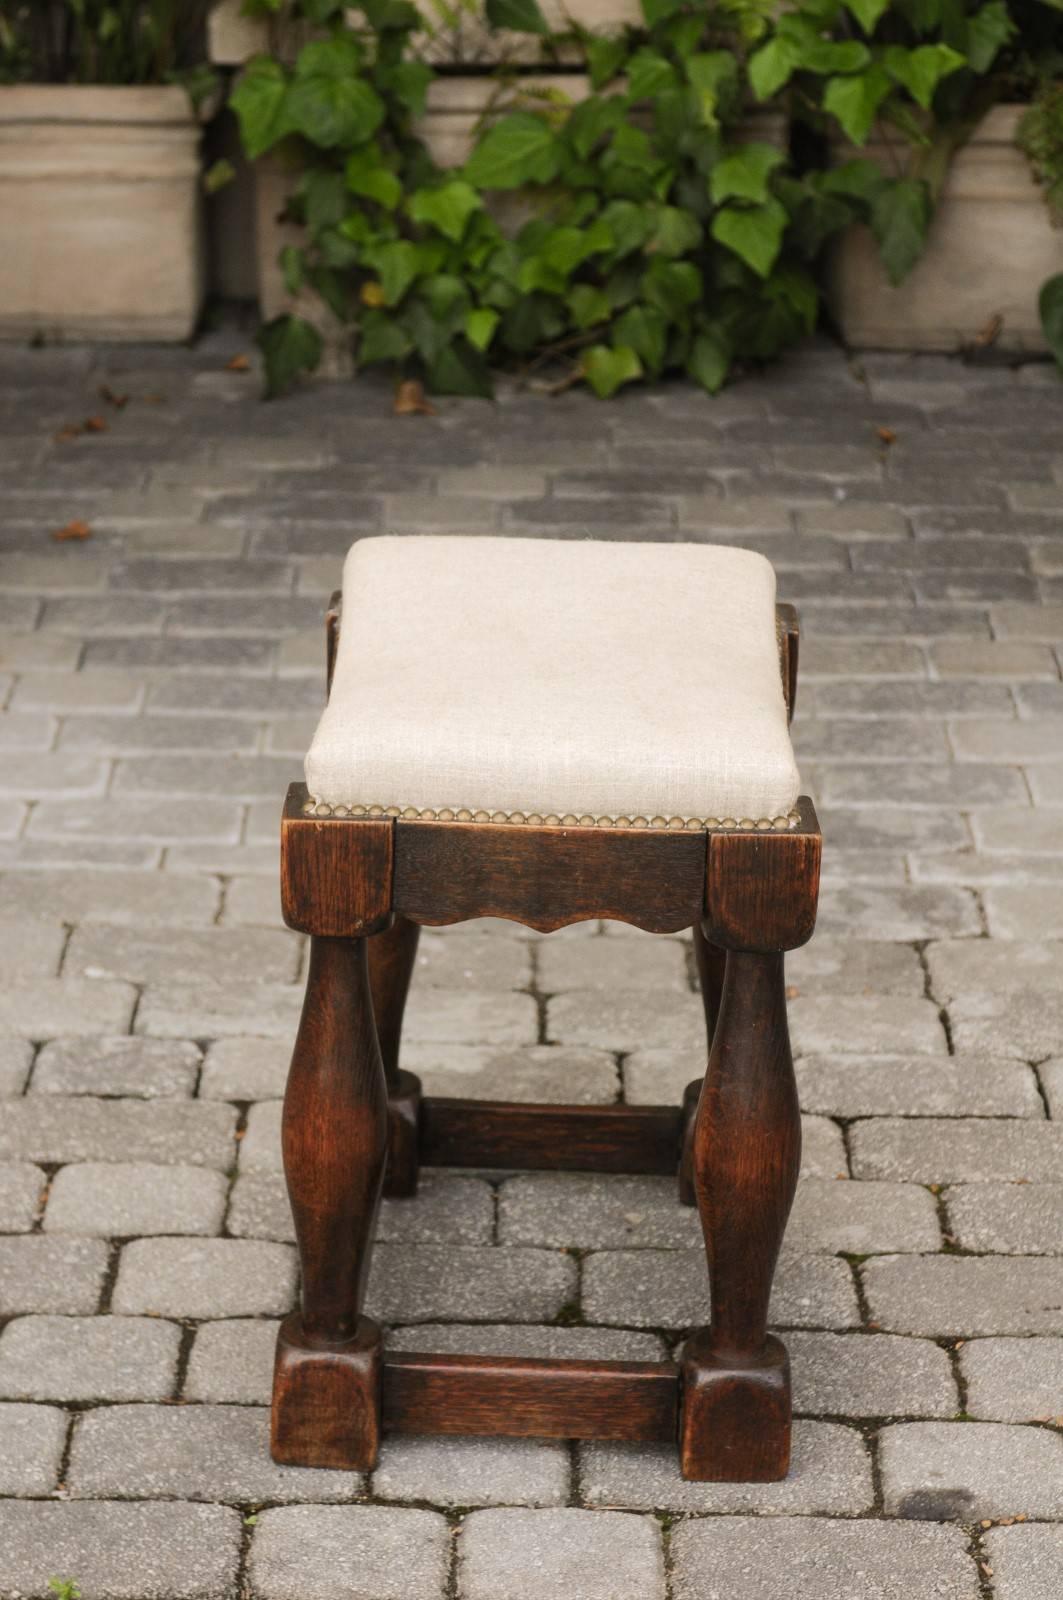 19th Century English 1820s Oak Saddle Seat Stool with Baluster Legs and New Upholstery